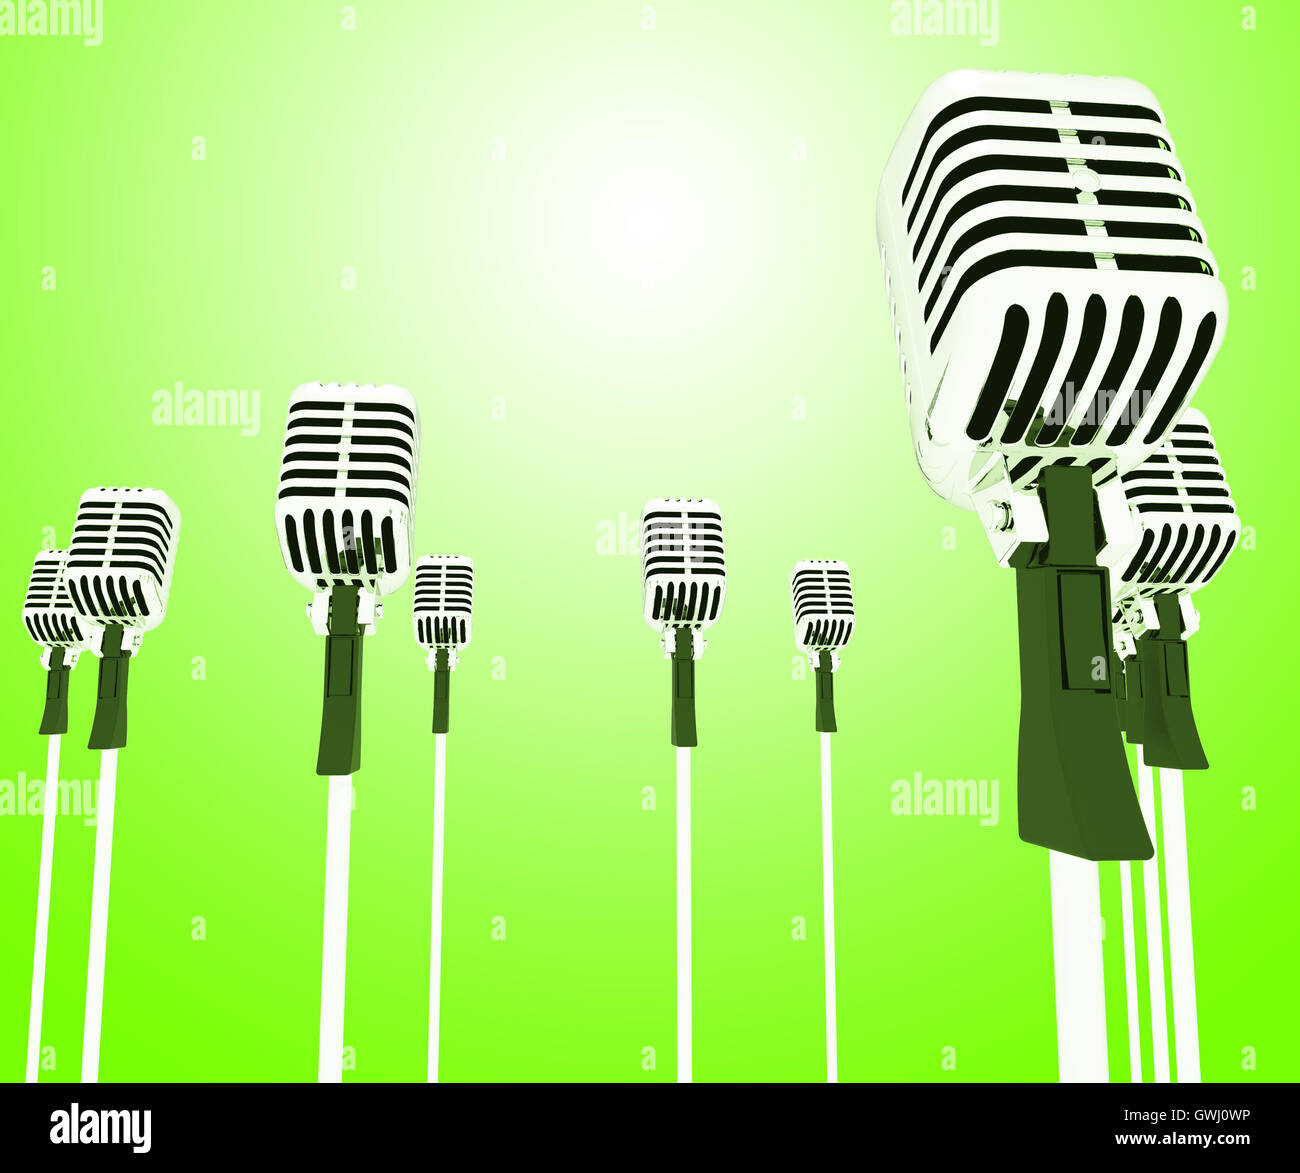 Microphones Mics Shows Musical Group Or Concert Stock Photo